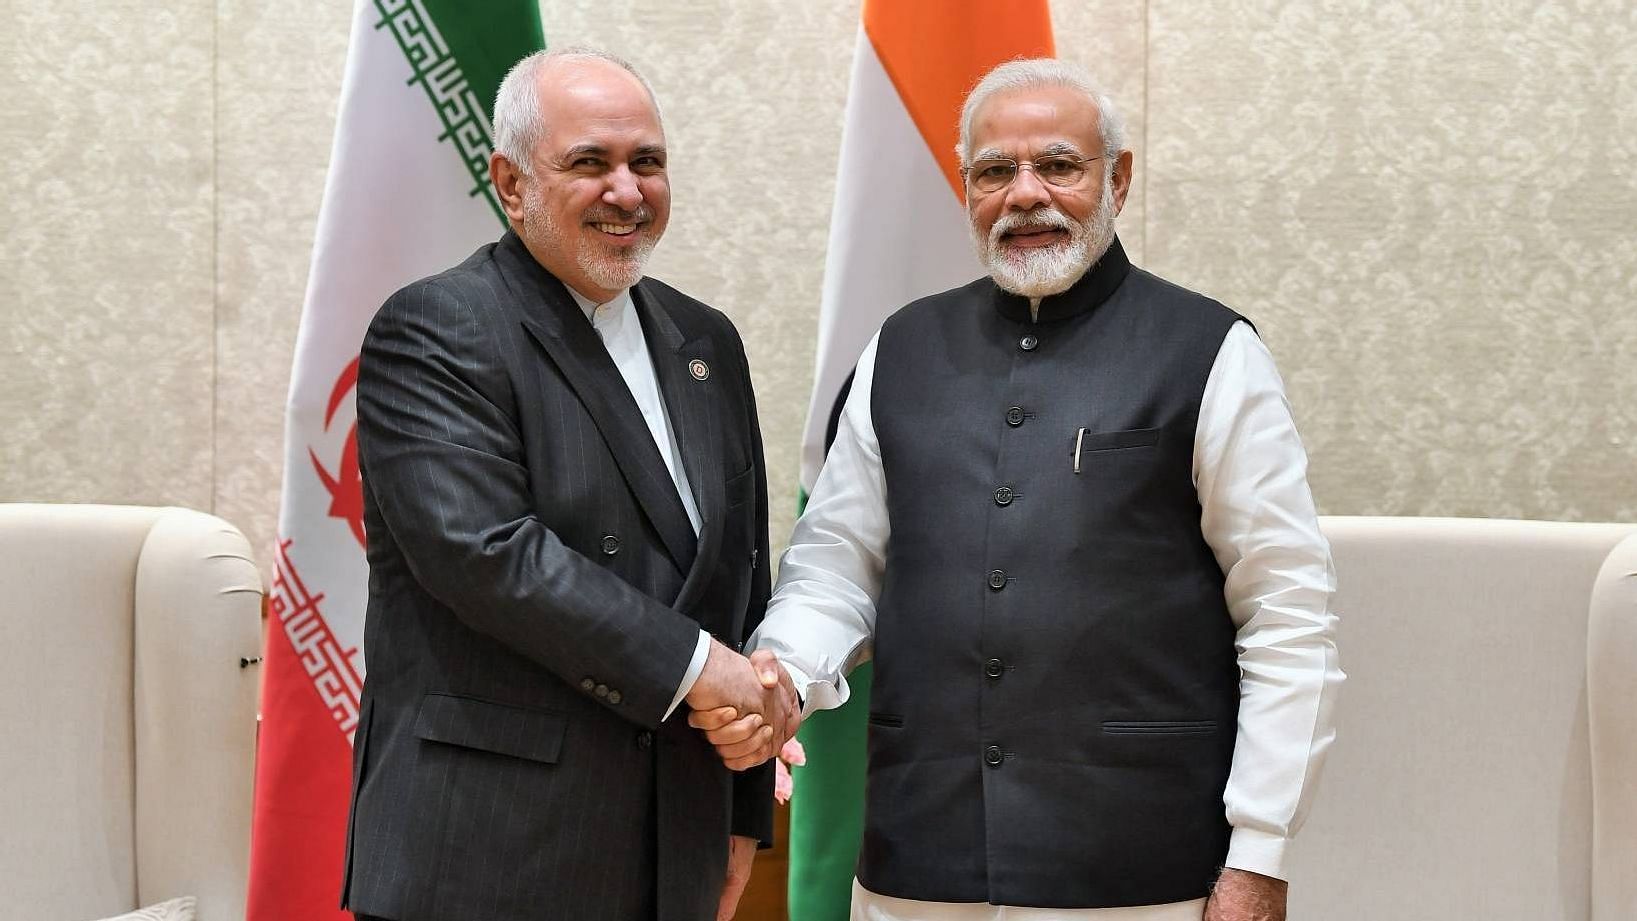 Prime Minister Narendra Modi shakes hands with Iran’s Foreign Minister Javad Zarif at a meeting in New Delhi.